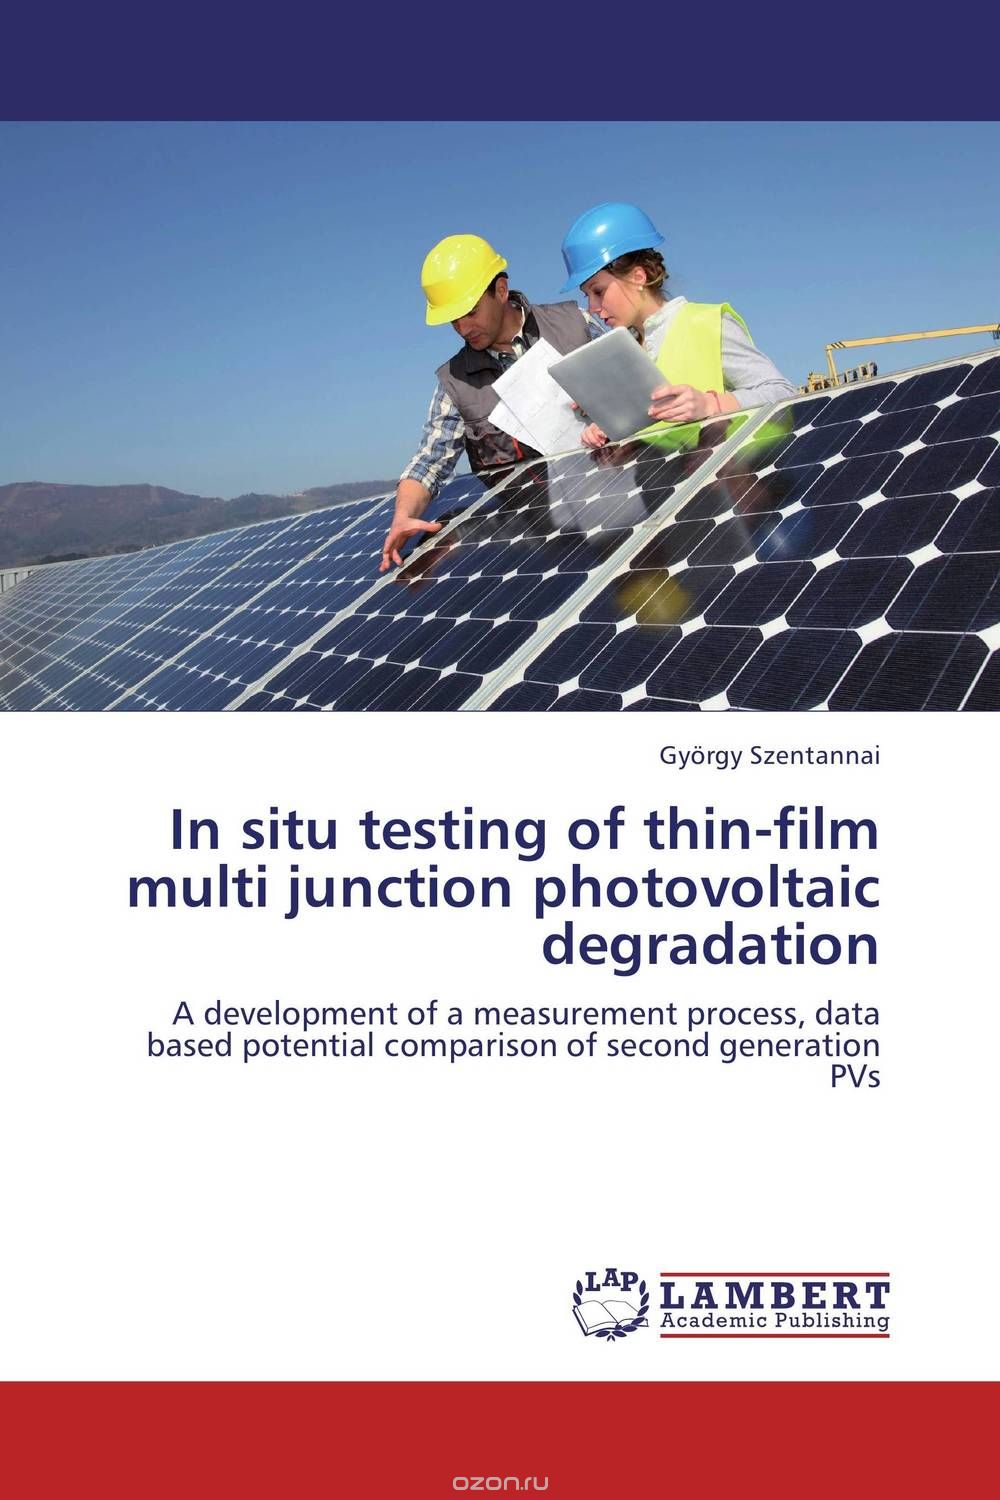 In situ testing of thin-film multi junction photovoltaic degradation